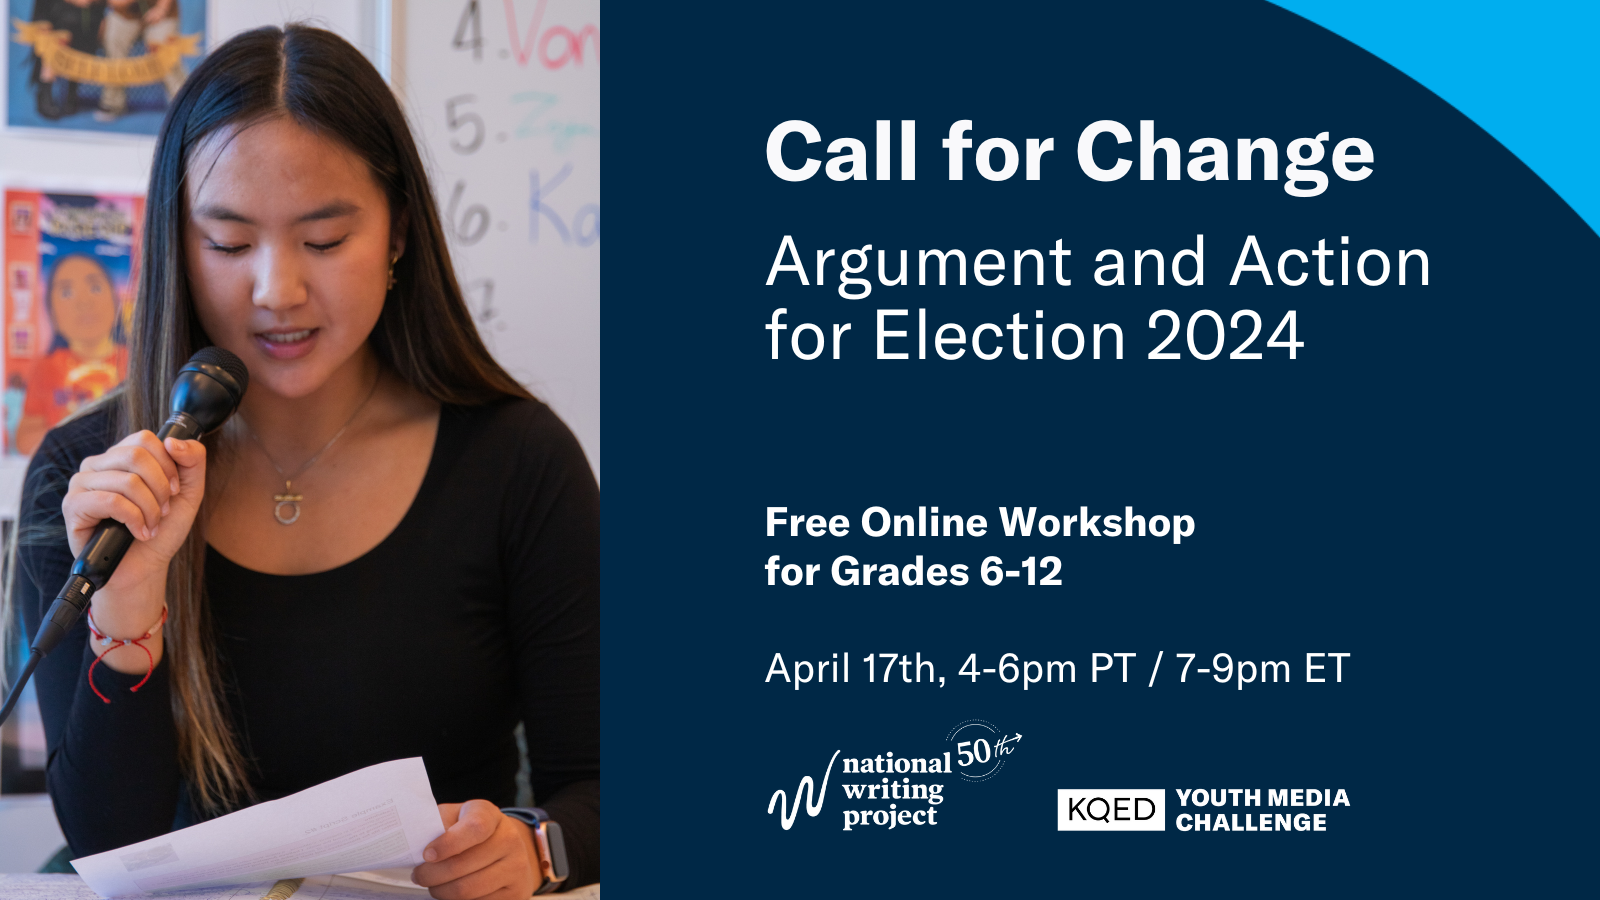 Event title: Call for Change: Argument Writing and Action for Election 2024. Image: Student is speaking into a microphone and reading from a piece of paper. 